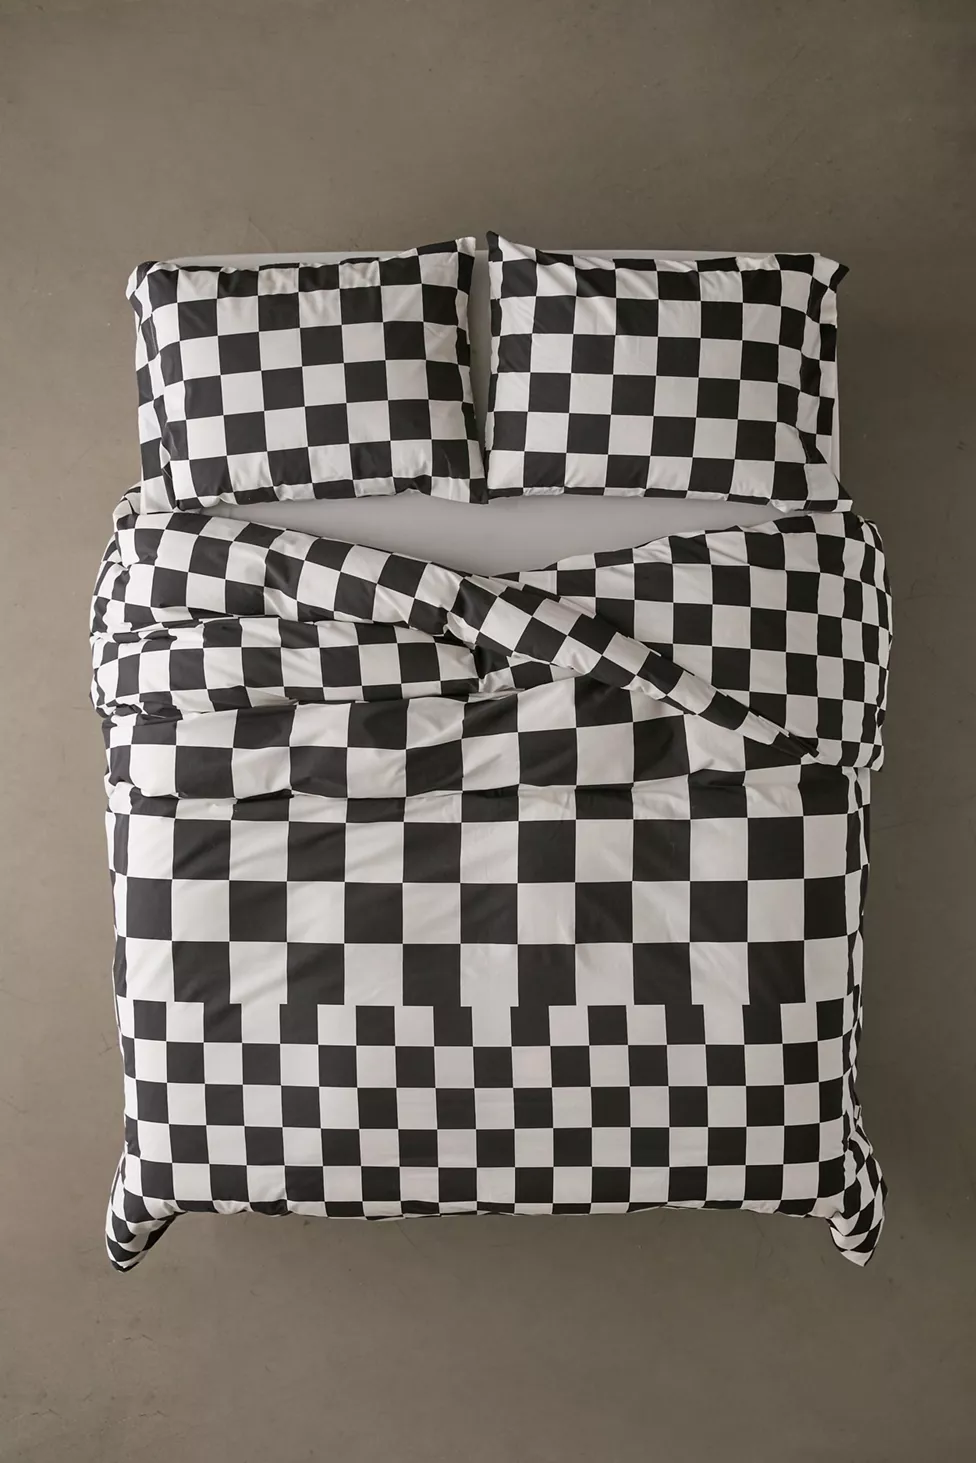 Play with Checkerboard Pattern